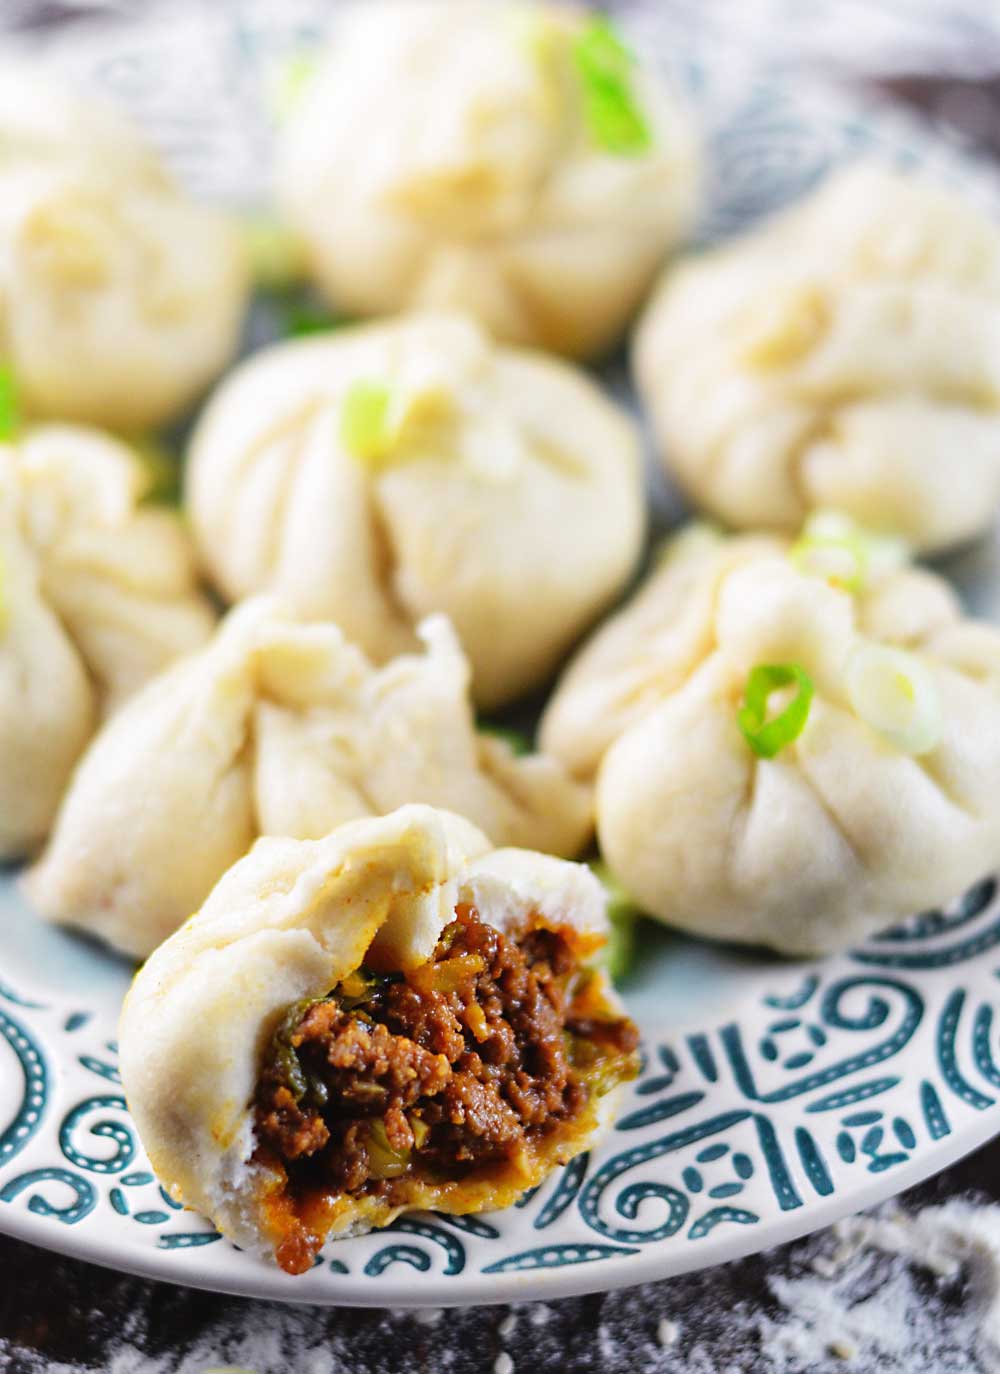 Asian-Spiced Beef Cabbage Bao Bierock feature a seasoned meat and cabbage mixture spiced with fiery Korean gochujang chile paste, sesame, and plenty of garlic and ginger. This unconventional bao is made with a single ingredient.